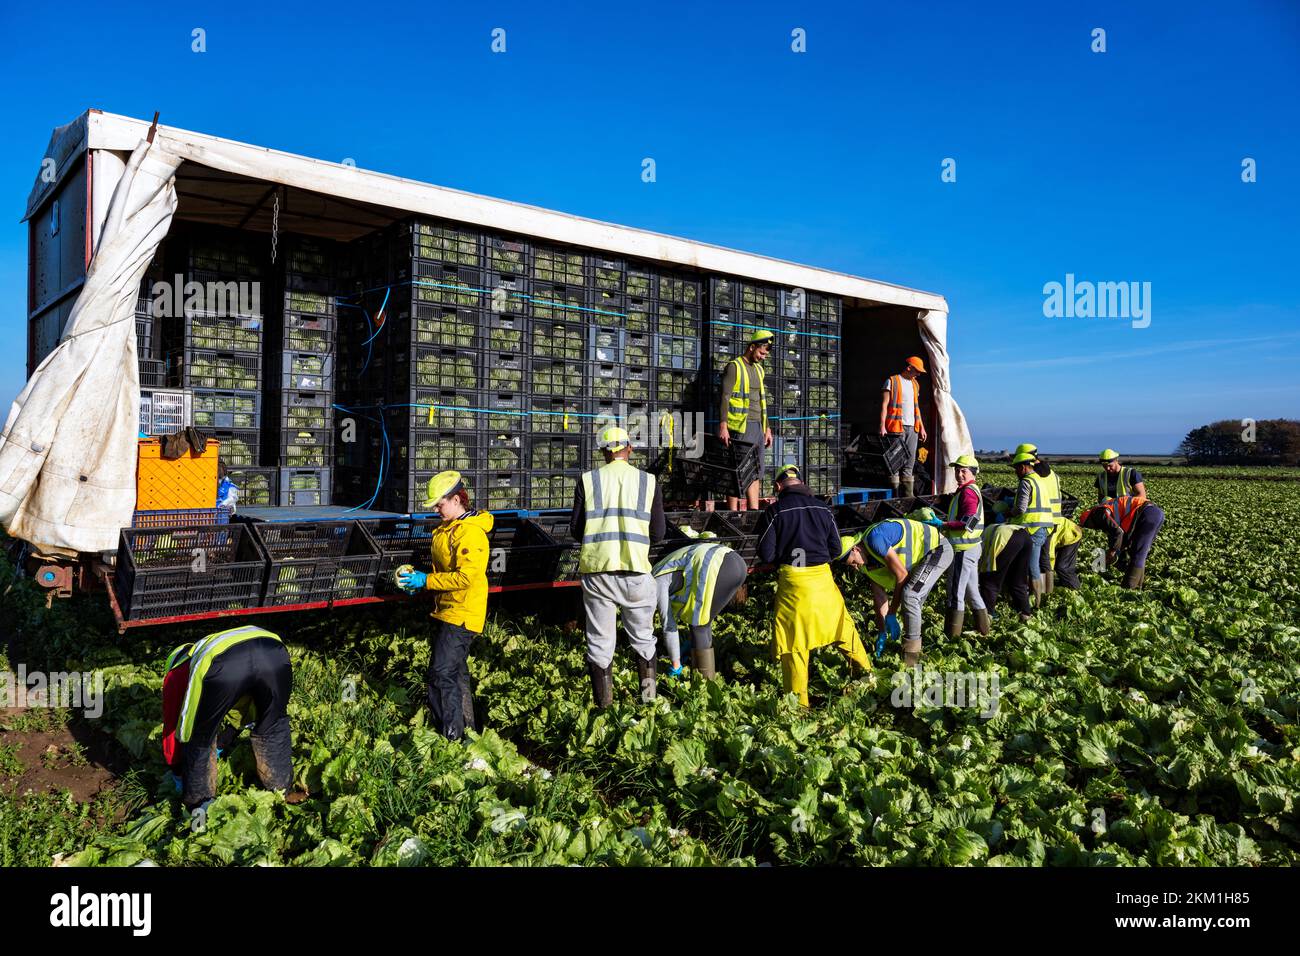 Ukrainian and Eastern European migrant workers harvesting lettuces Bawdsey Suffolk UK Stock Photo